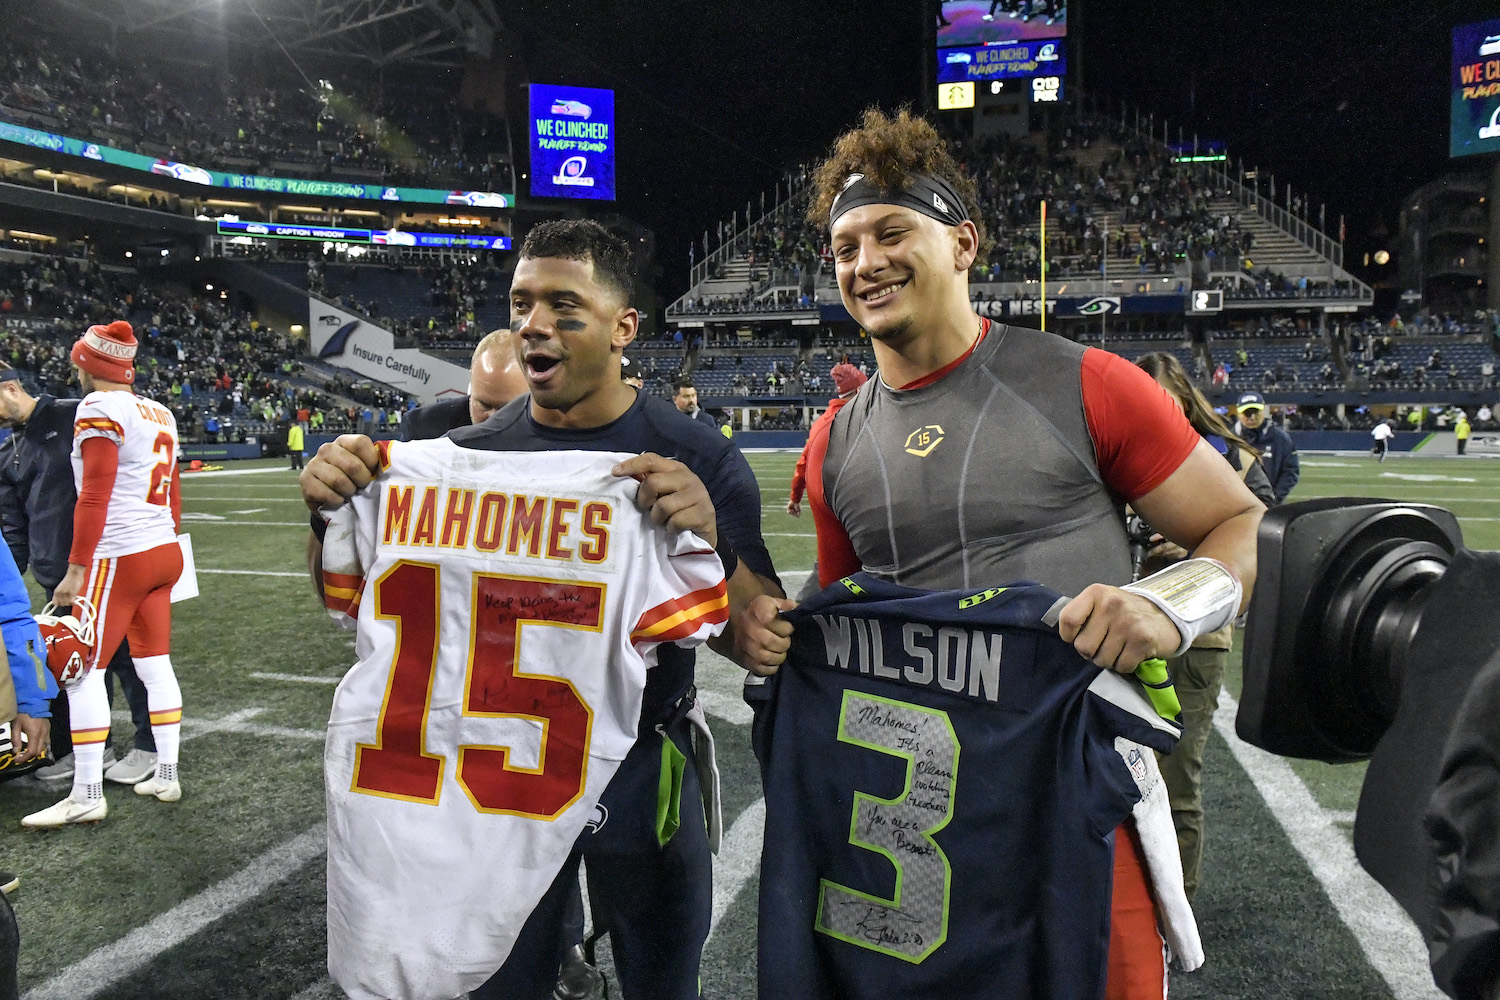 Russell Wilson's stellar play makes him a leading NFL MVP candidate, but Patrick Mahomes is complicating the race.